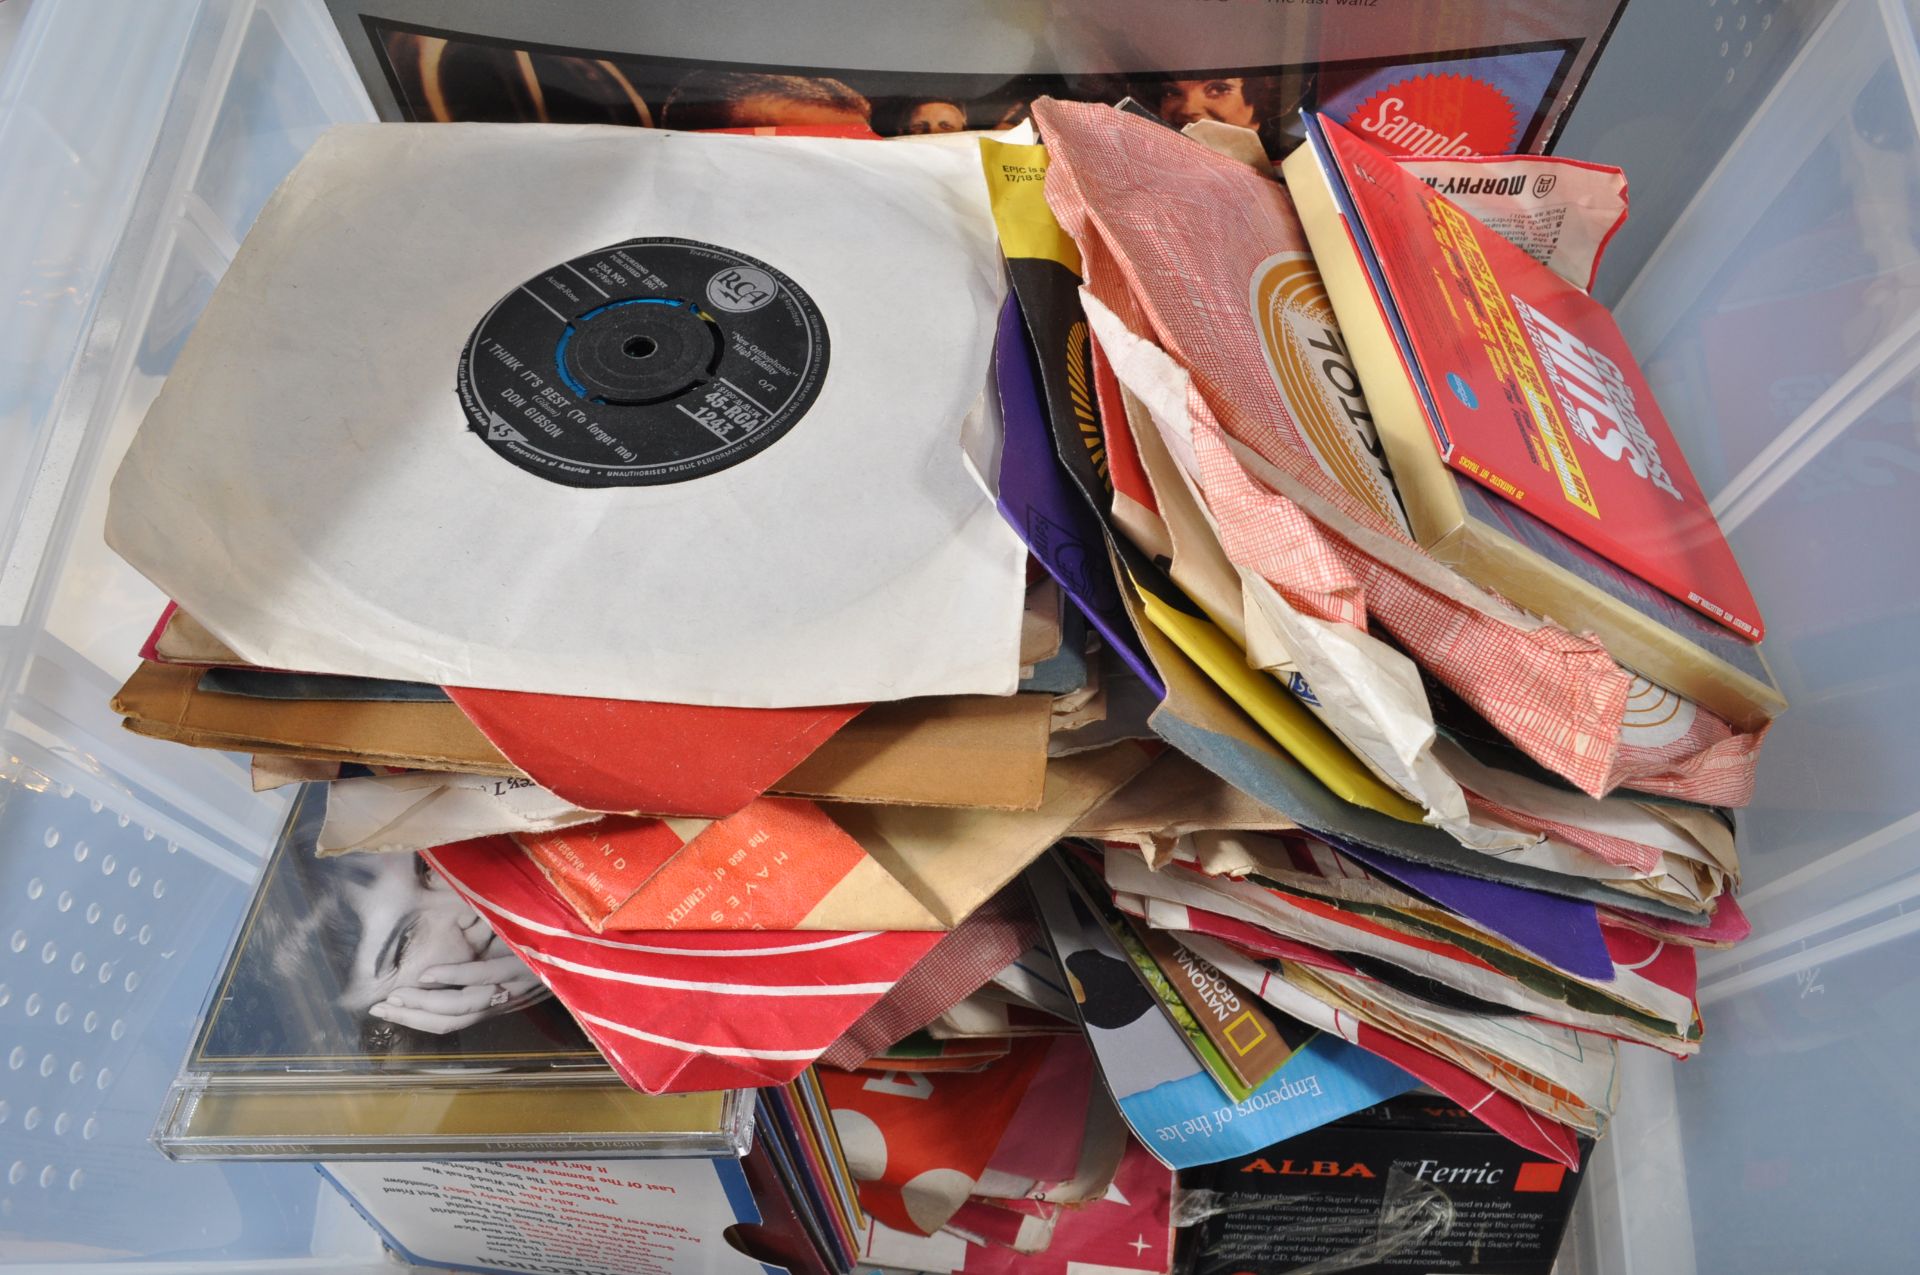 LARGE COLLECTION OF LP’S VINYL 45RPM RECORDS - Image 2 of 6